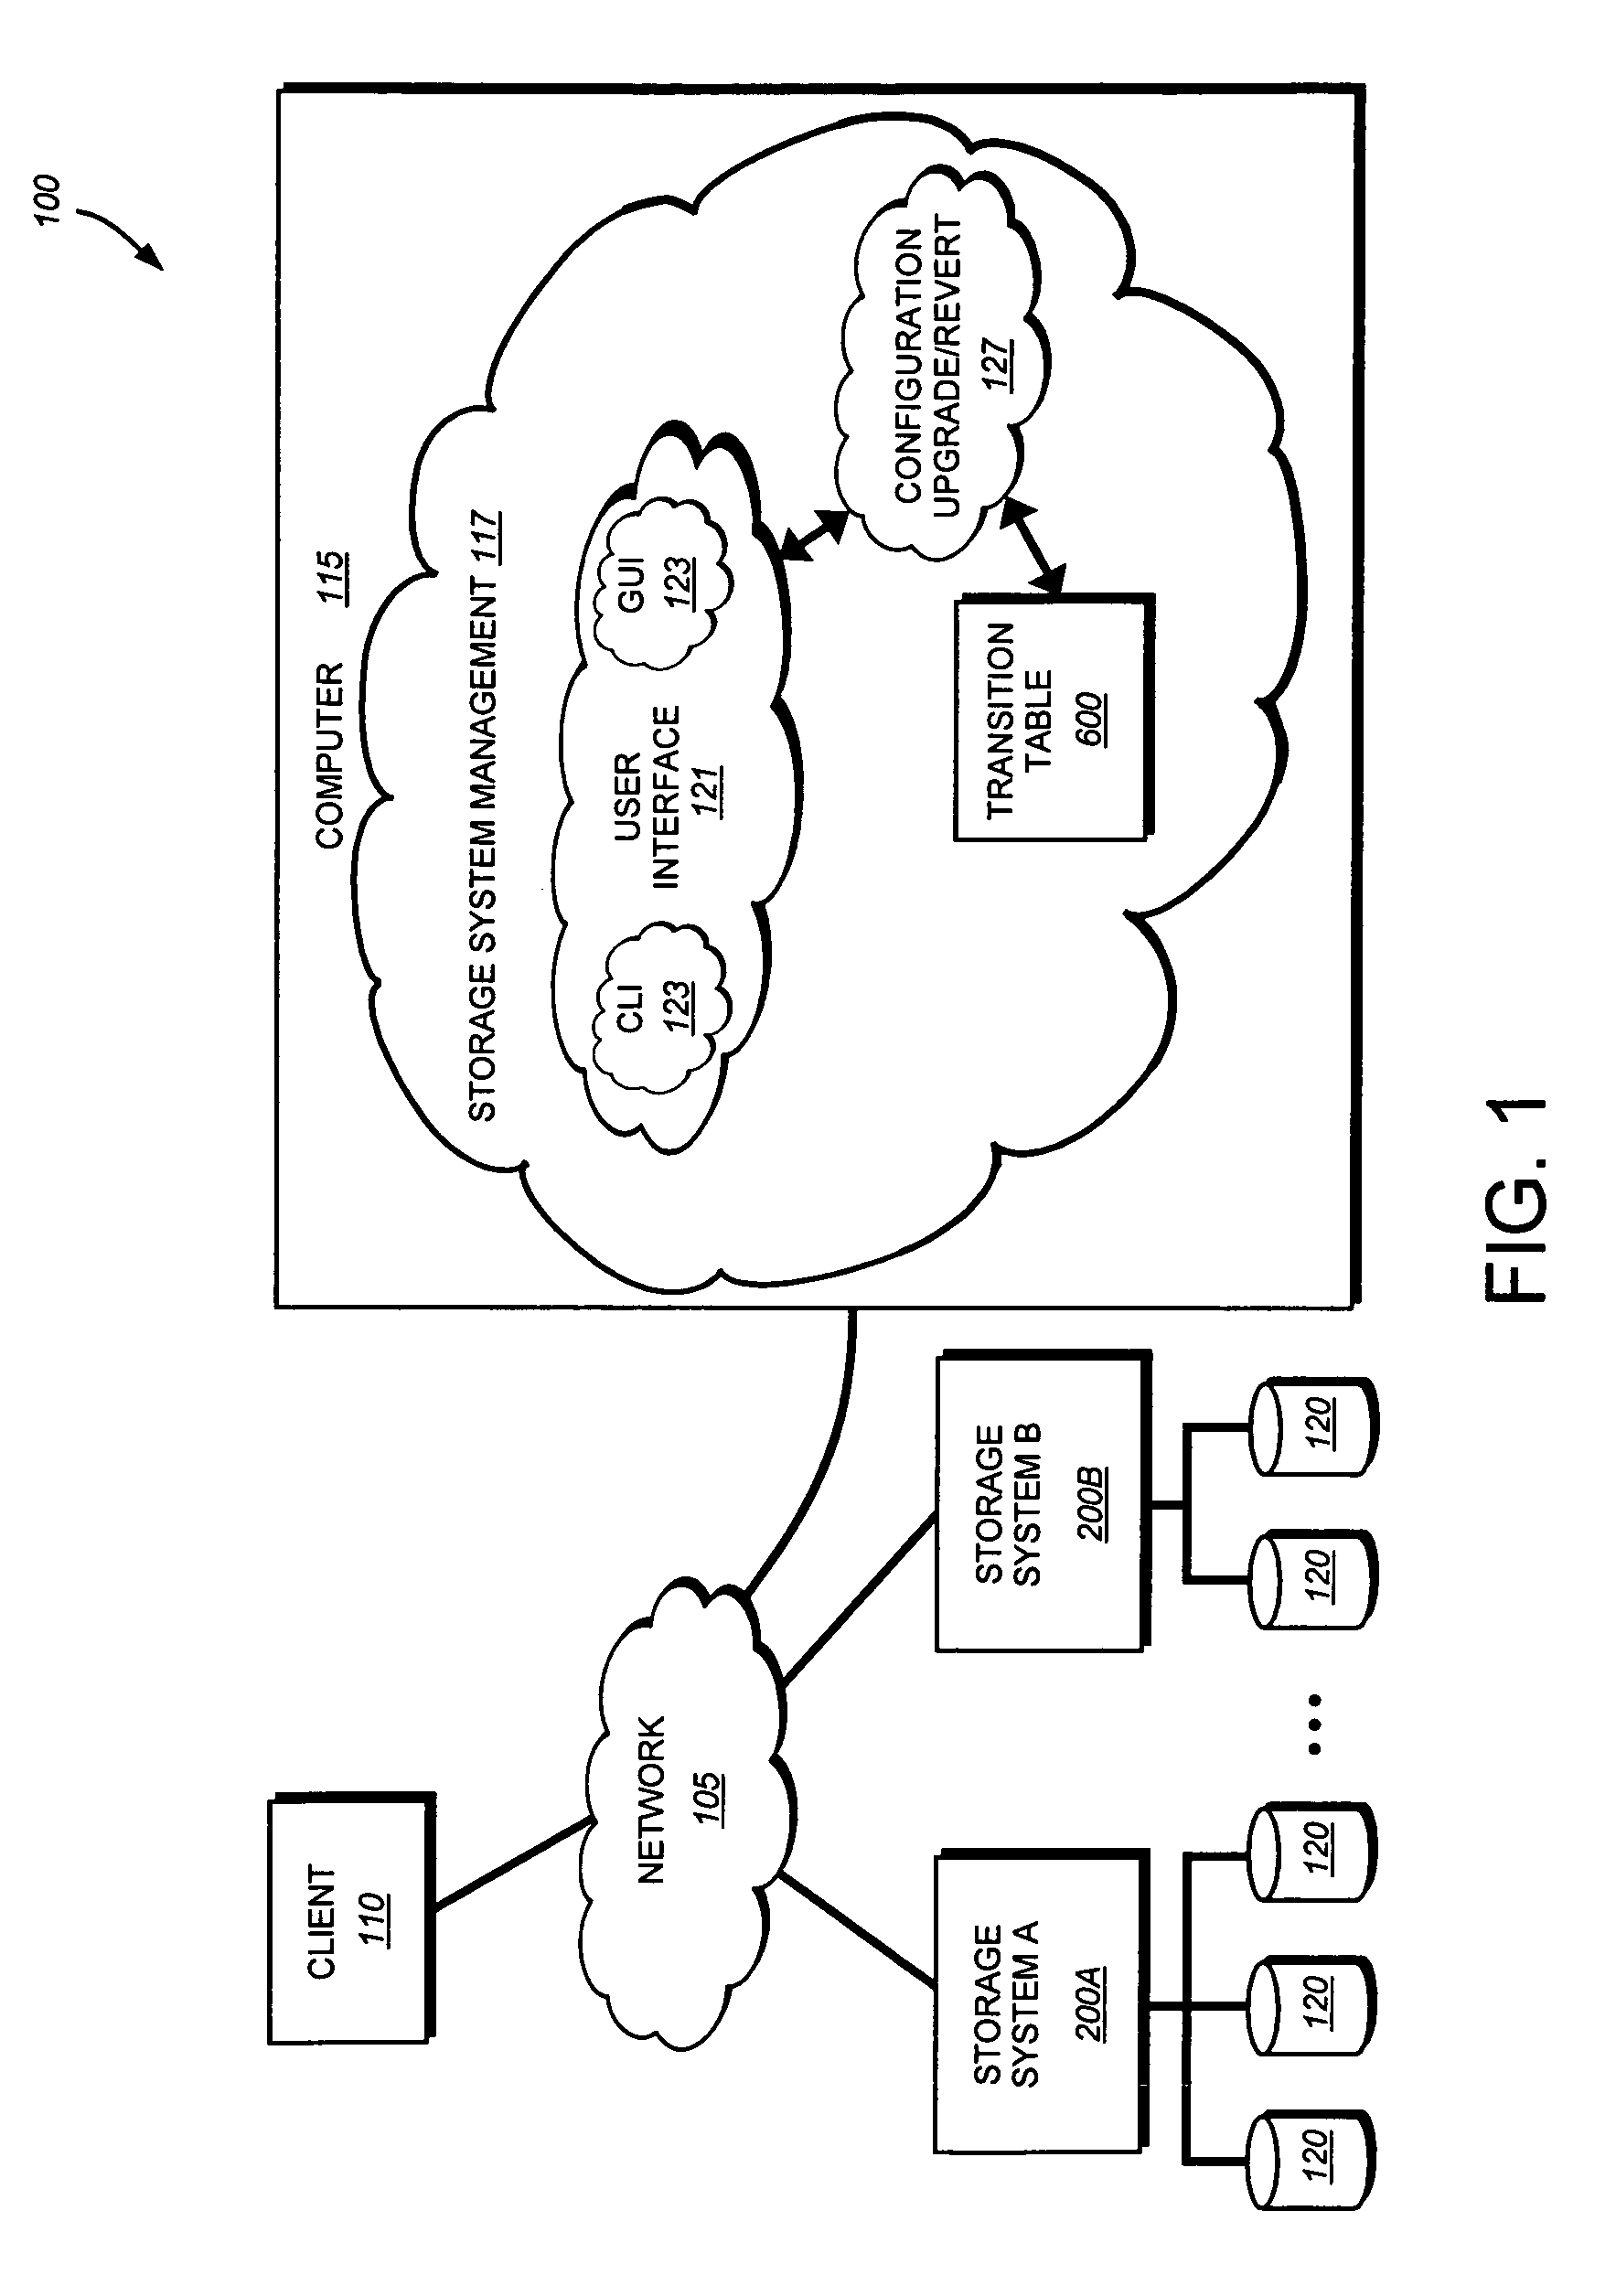 System and method for automatically upgrading/reverting configurations across a plurality of product release lines